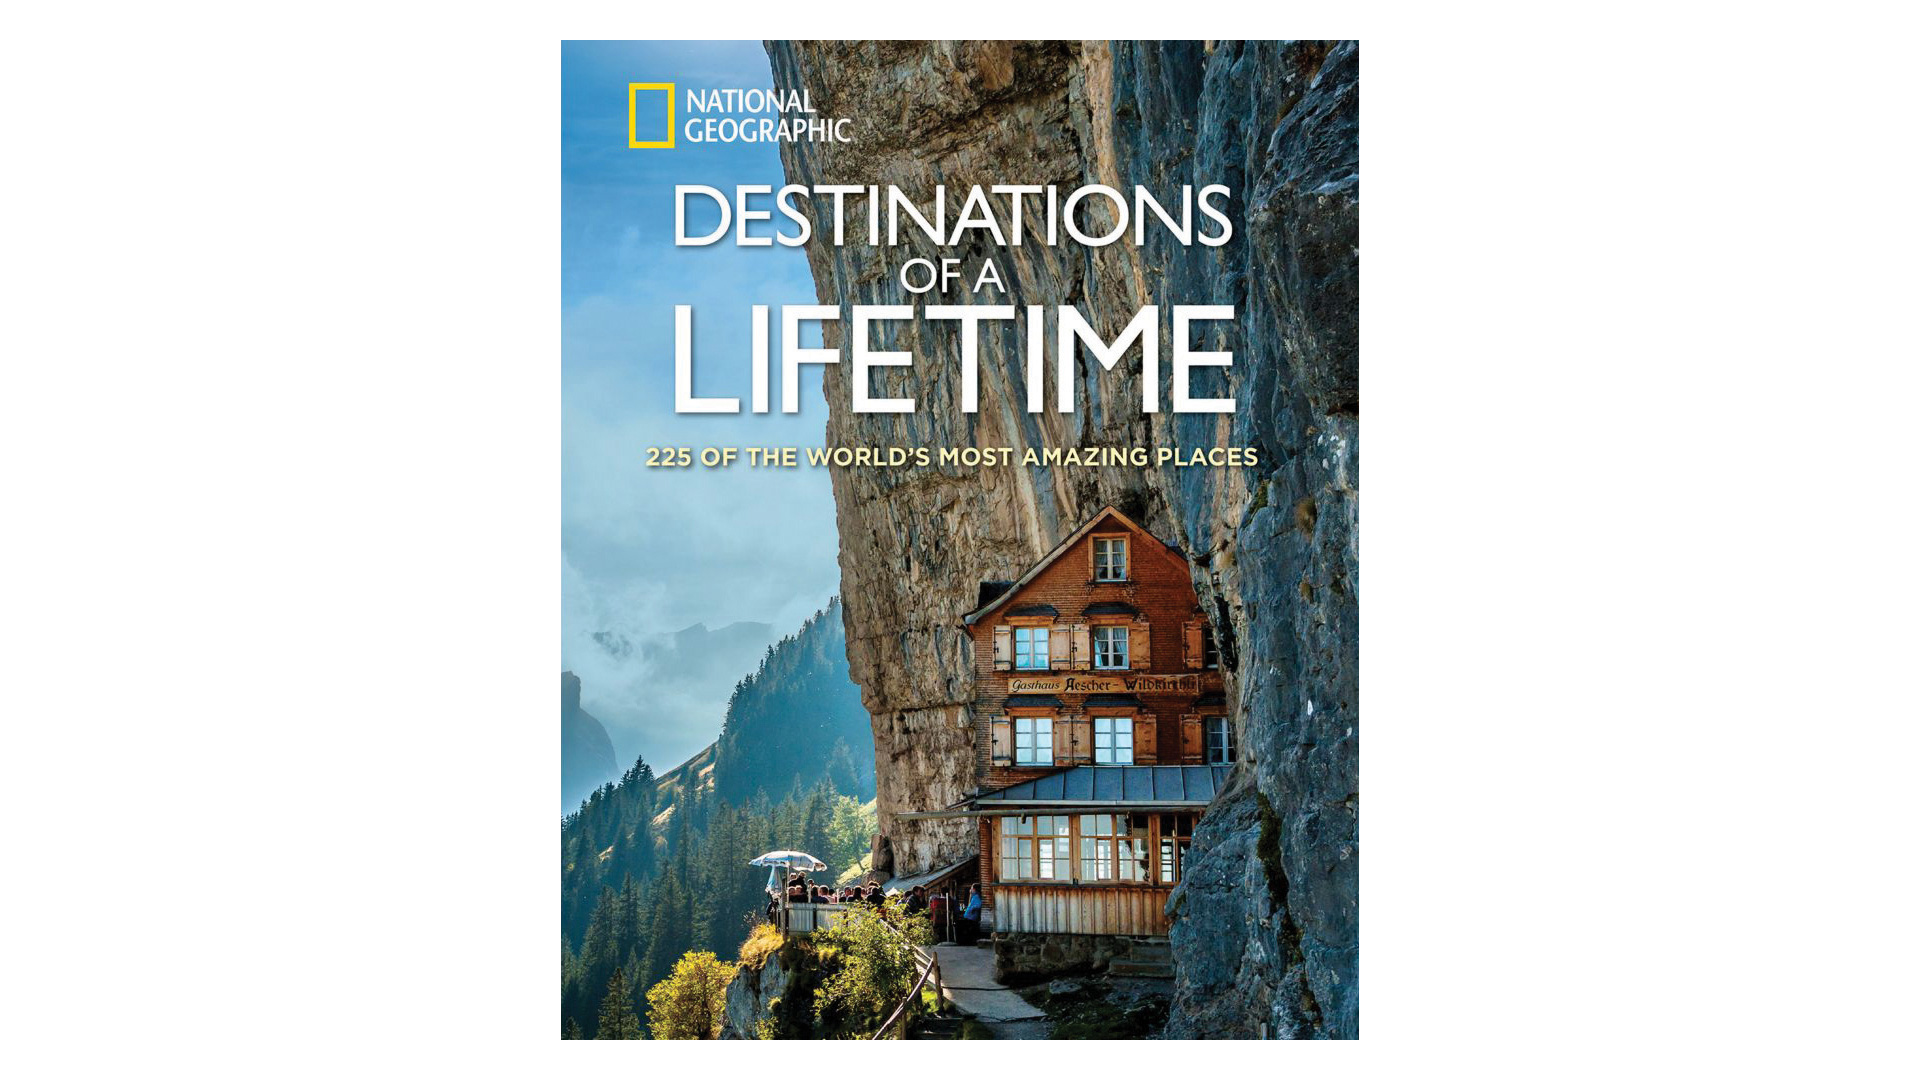 Destinations of a Lifetime by National Geographic